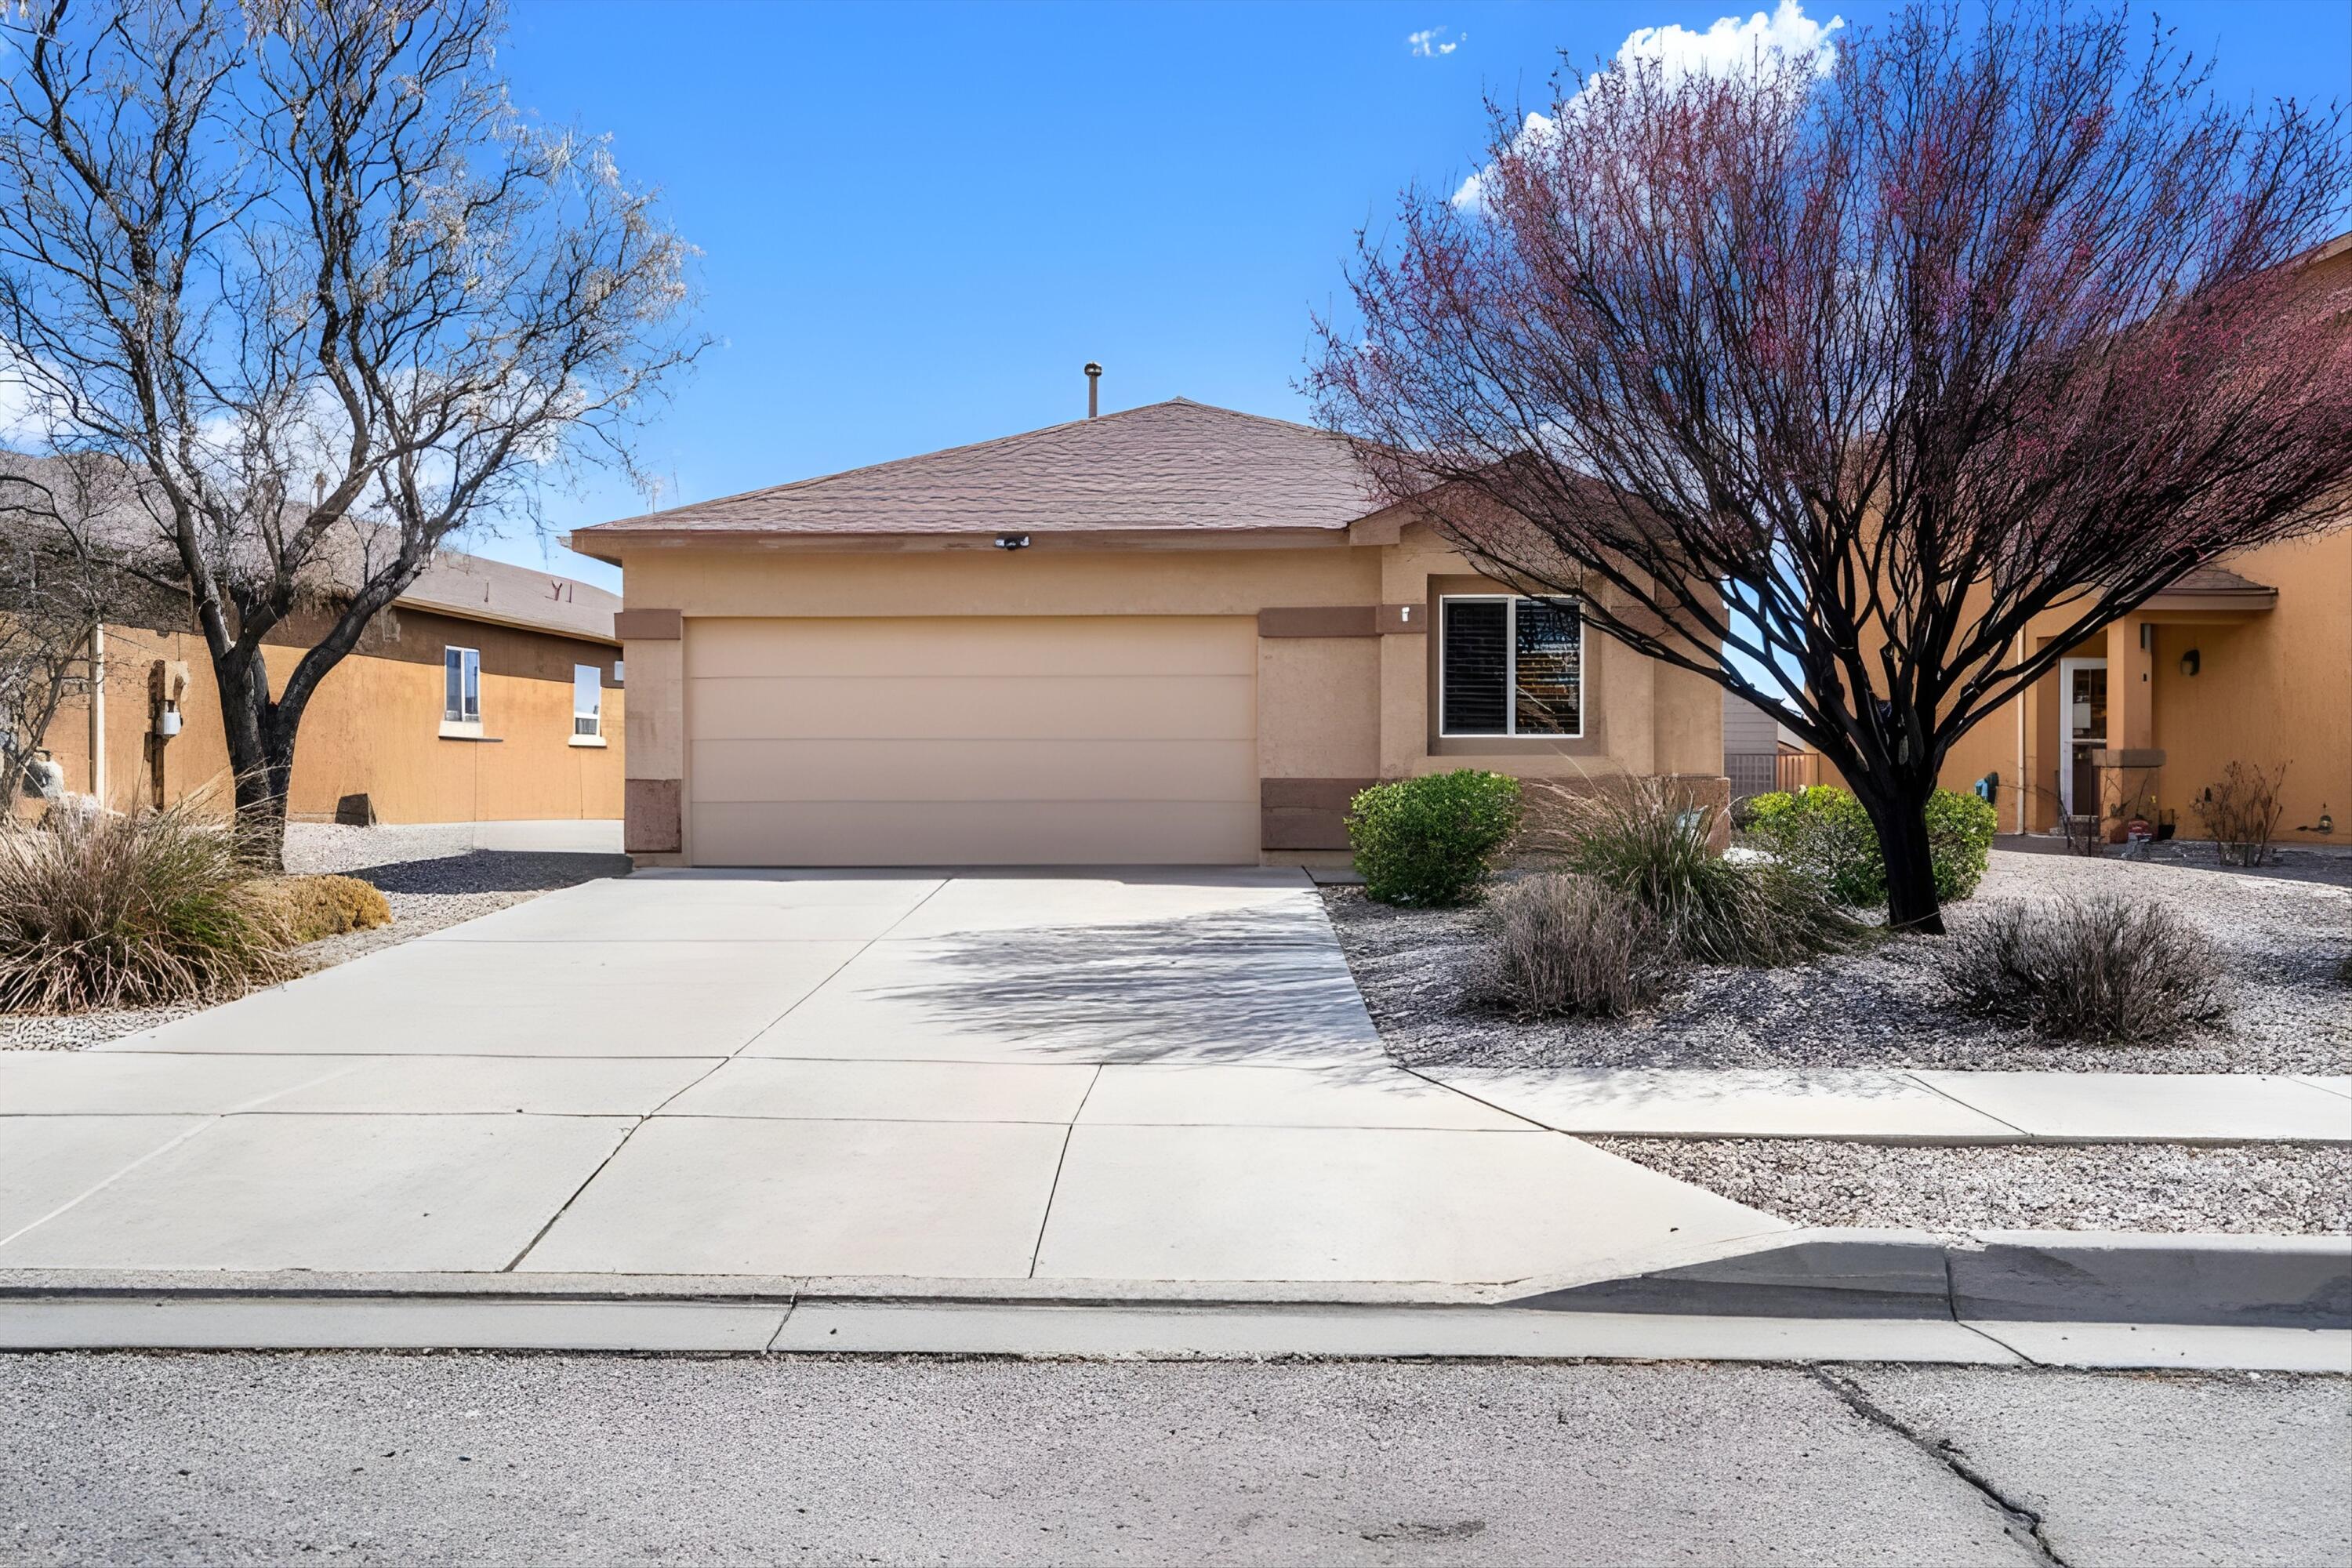 Welcome home to this quaint one story home with 2 bedrooms and 2 baths.  Located in Northern Meadows within close proximity to parks to enjoy the our doors.   2 car garage, xeriscape landscaping in front and back with a backyard patio.  Lovingly cared for and ready for new owners to make theirs.